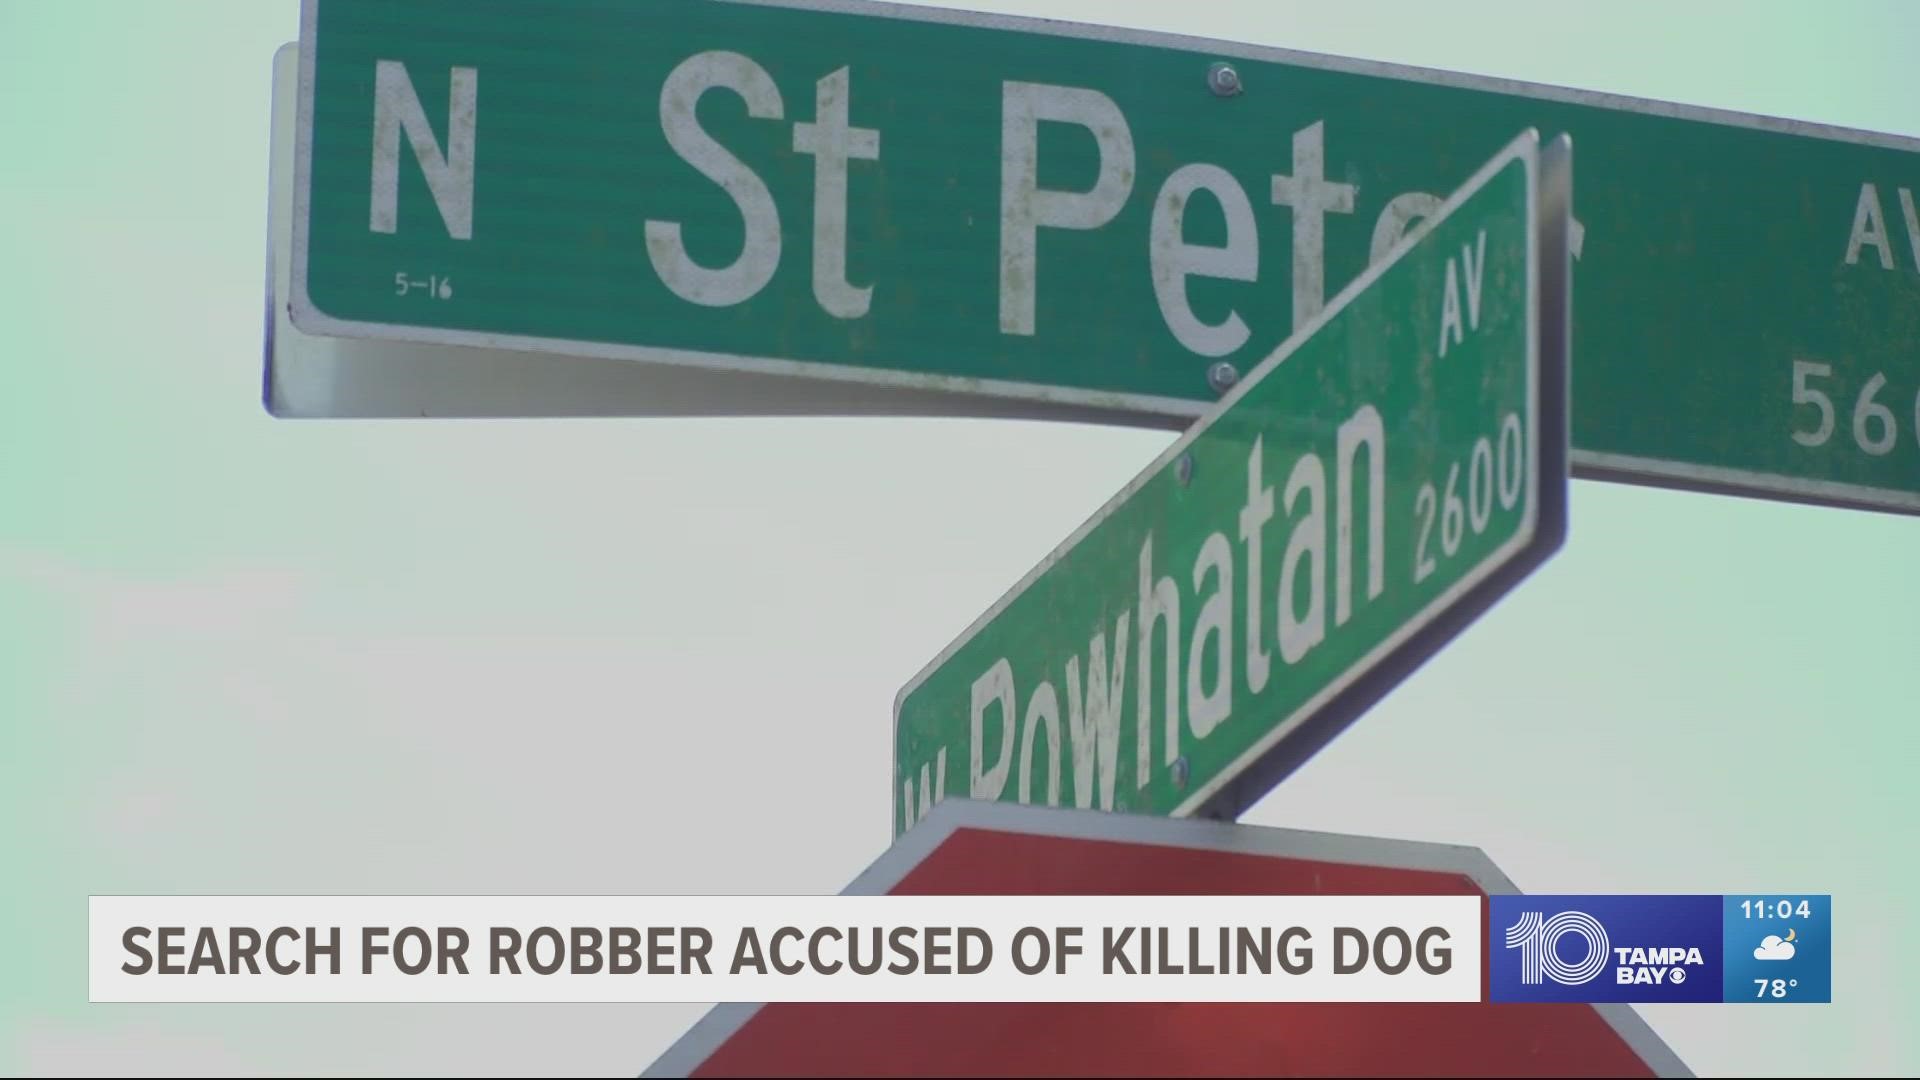 Police say a man was walking his two dachshunds near the 2600 block of W. Powhatan Avenue when an armed man came up behind him, pointed a gun and demanded money.